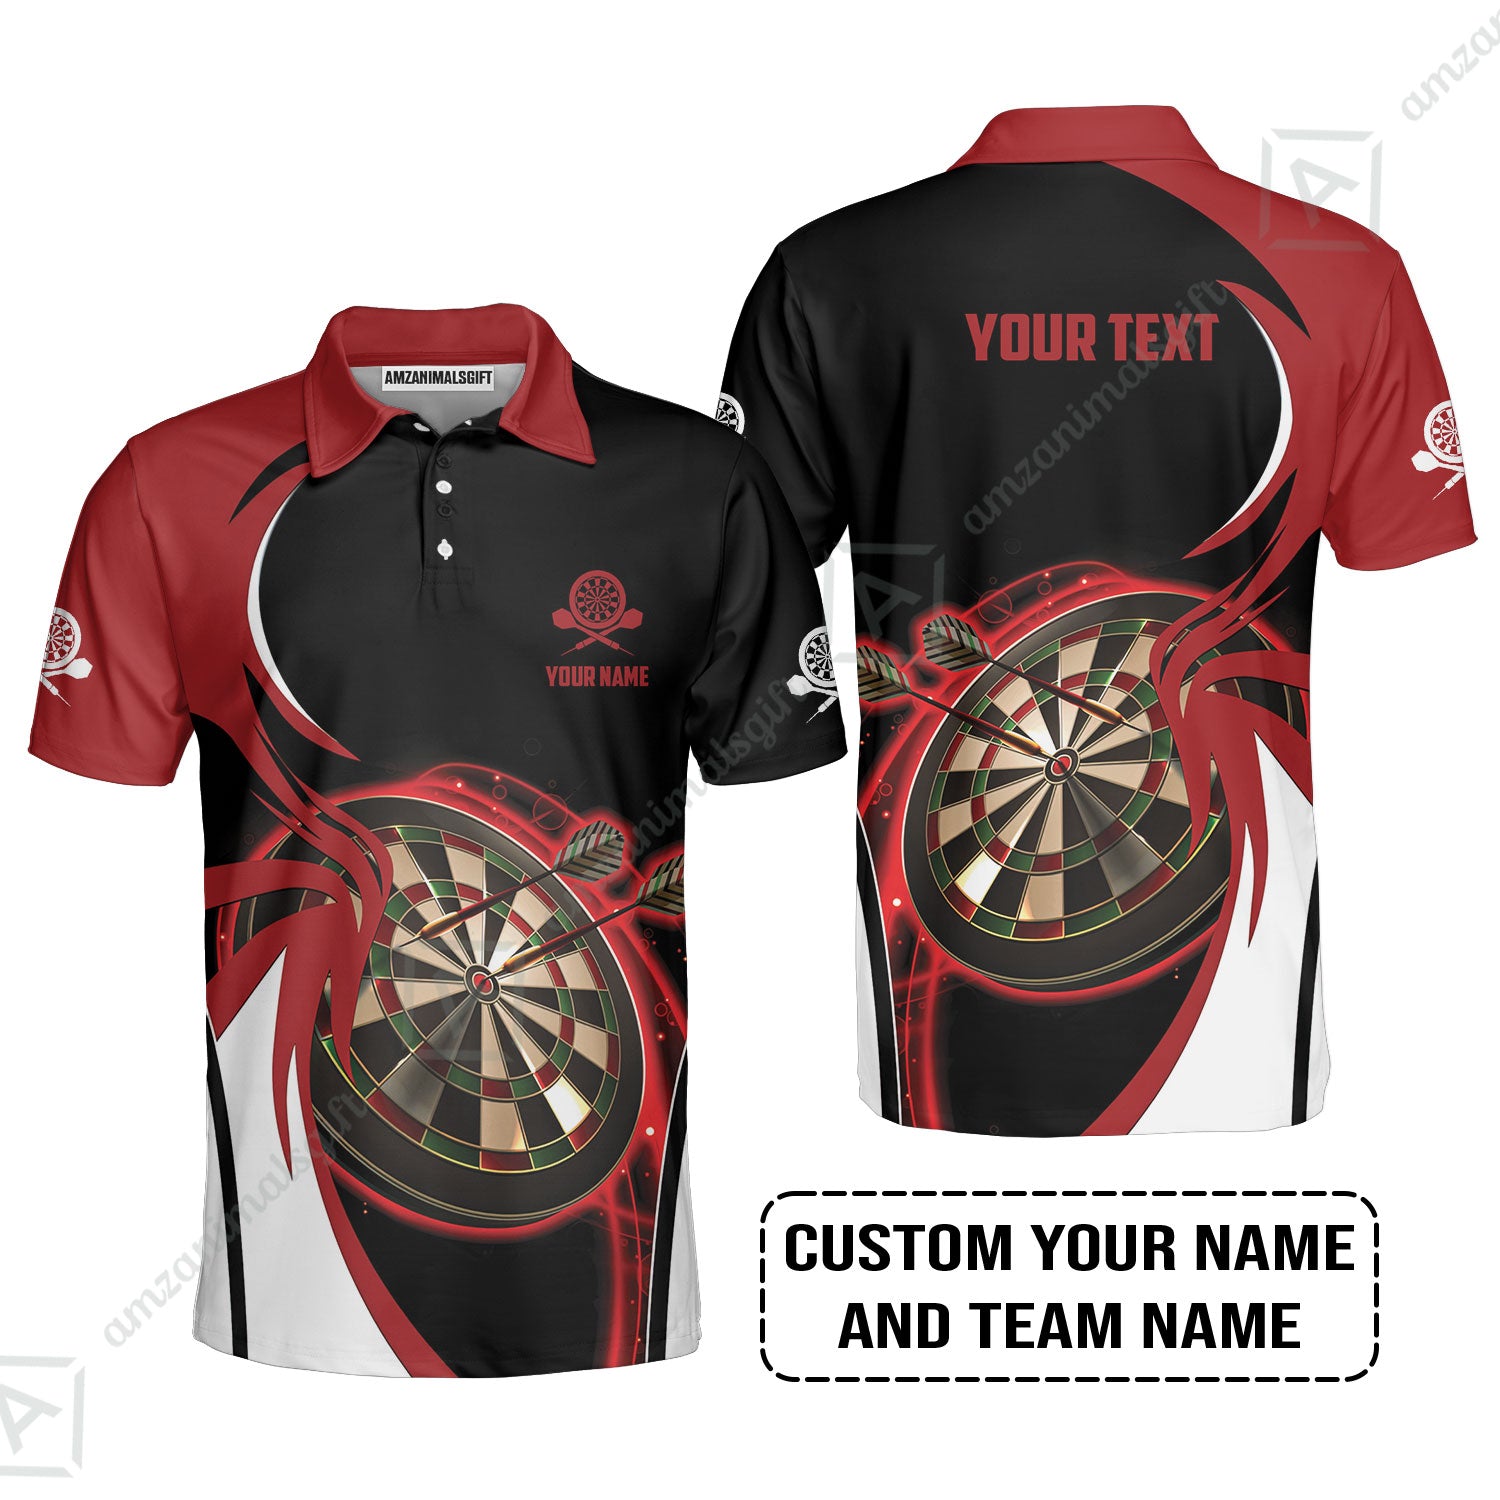 Customized Name & Text Darts Polo Shirt, Personalized Red Darts Uniforms Polo Shirt